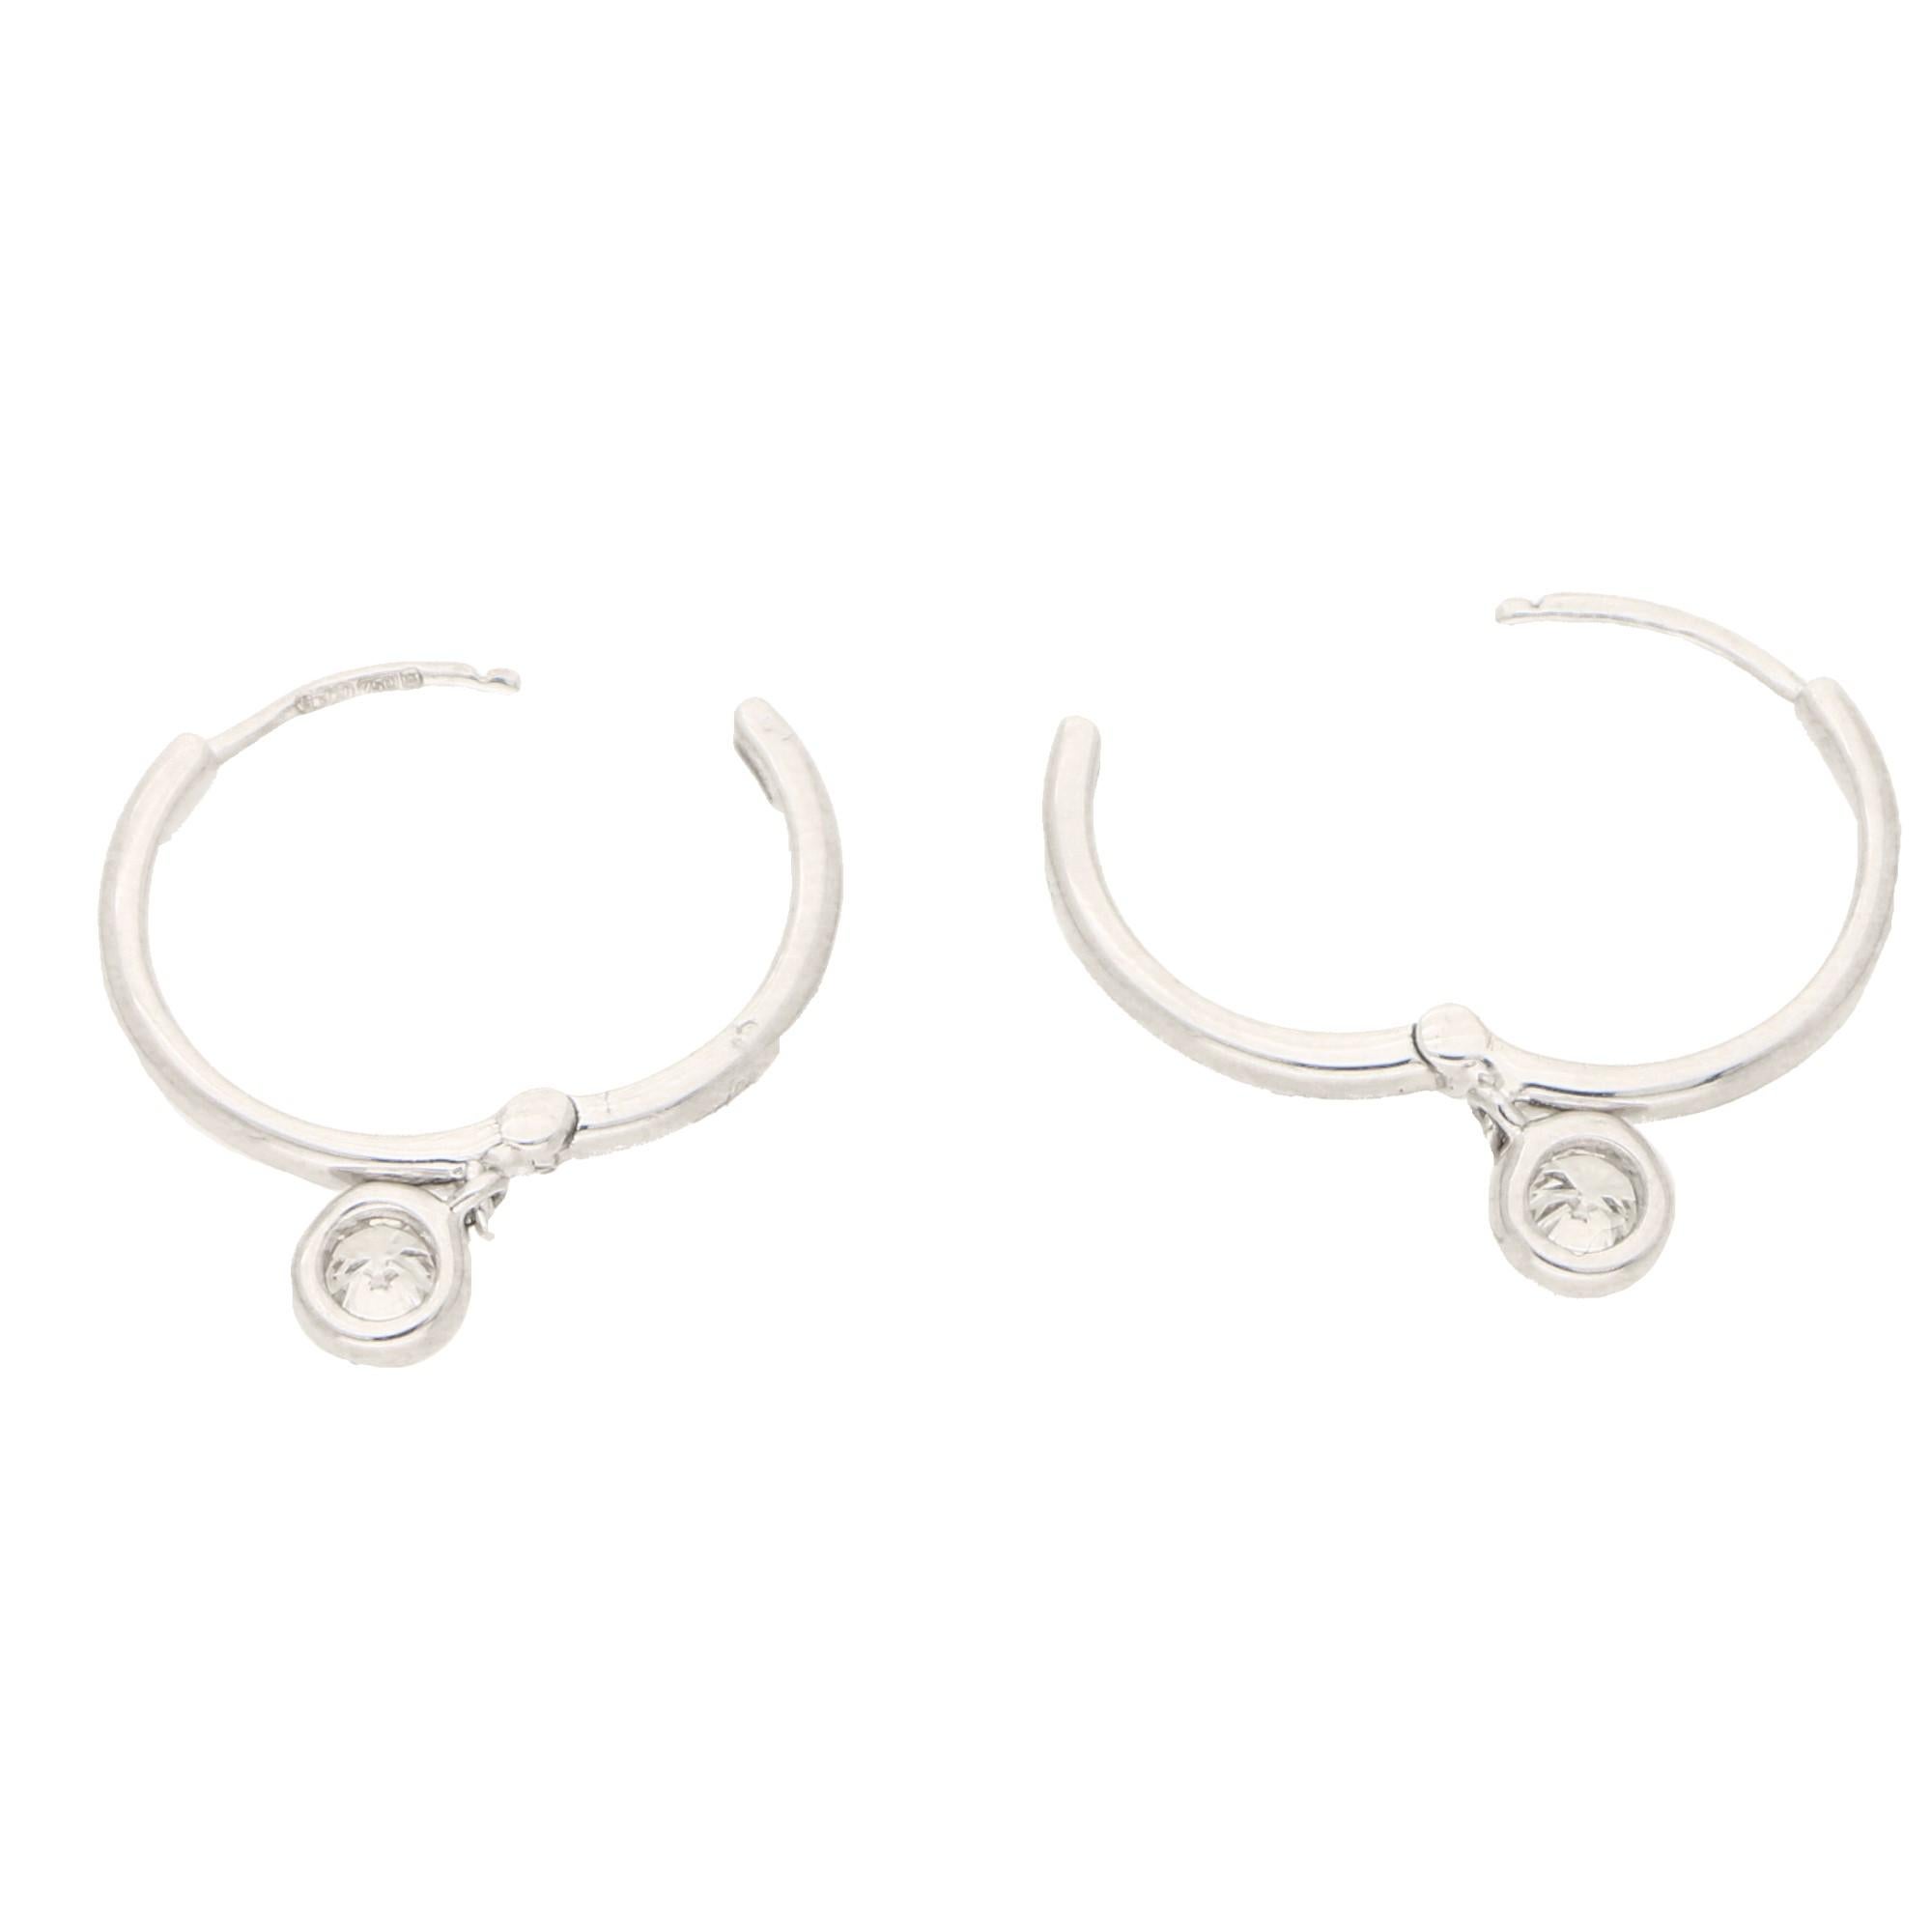 A lovely pair of diamond drop hoop earrings set in 18k white gold.

Each diamond is composed of a simple solid 18k white gold hoop. Suspended from the bottom of the hoop is an articulated rub-over set diamond drop which hangs elegantly from the ear.